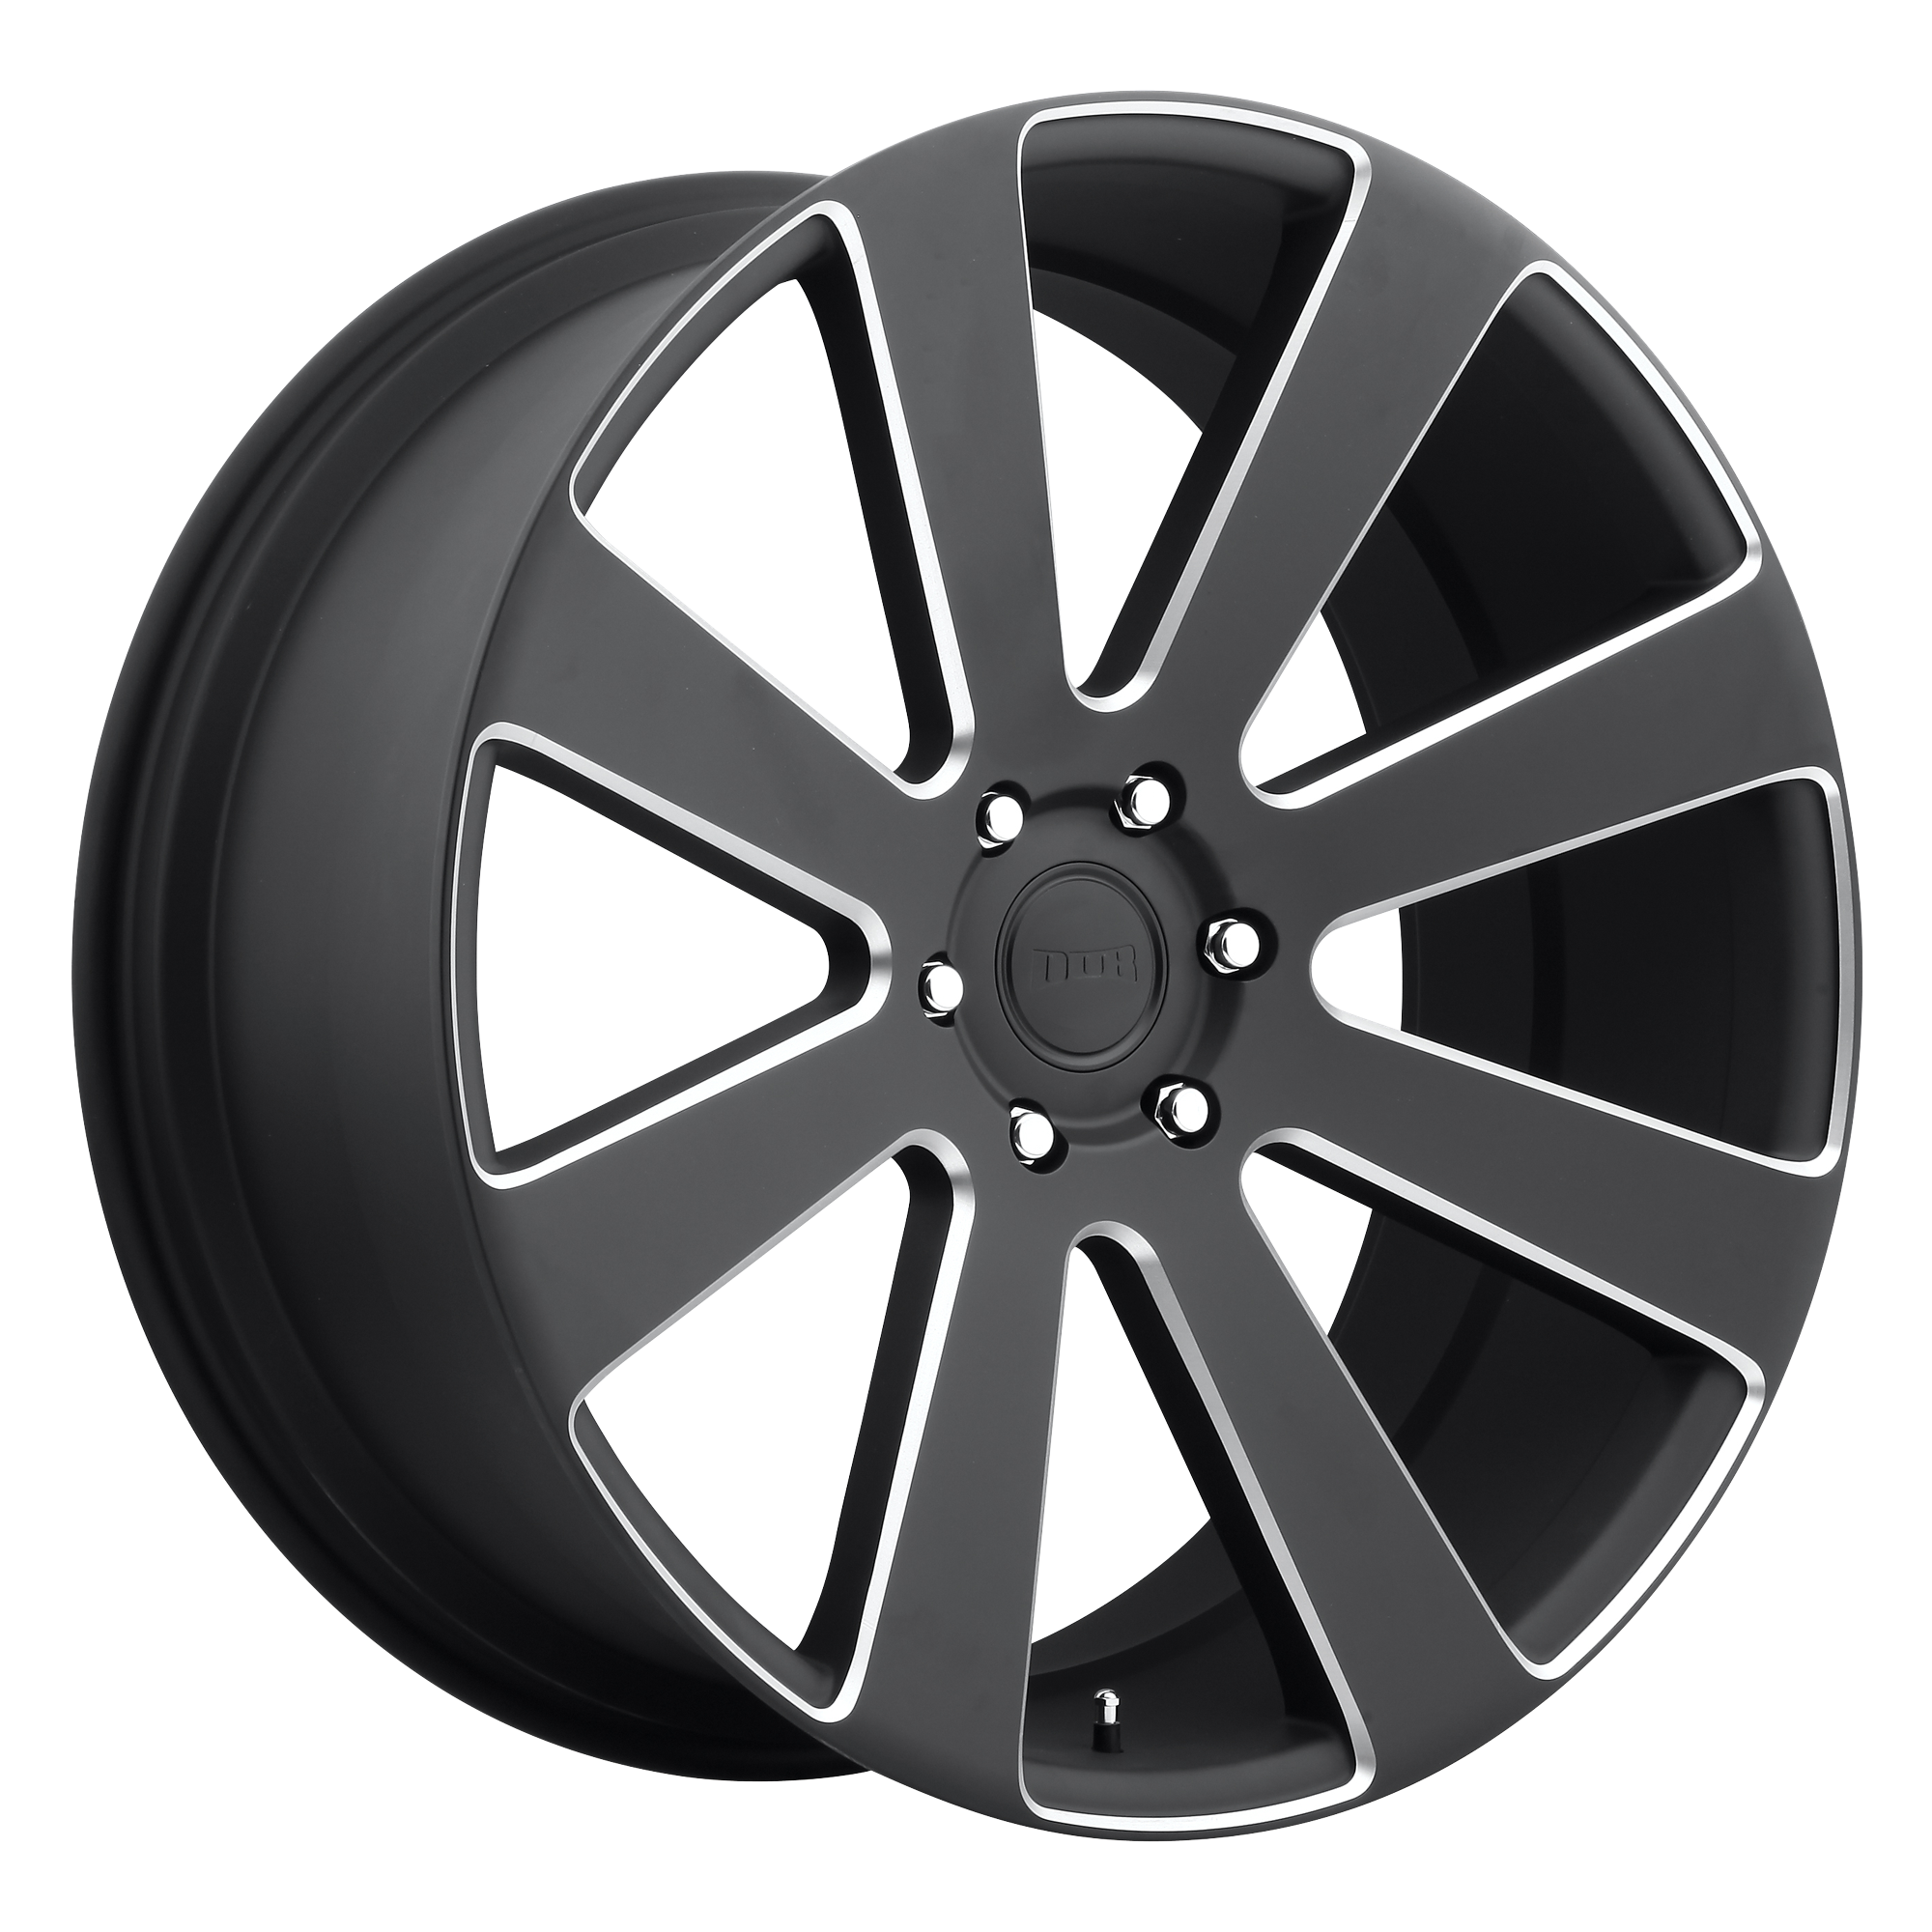 8-BALL 24x10 6x135.00 MATTE BLACK MILLED (30 mm) - Tires and Engine Performance